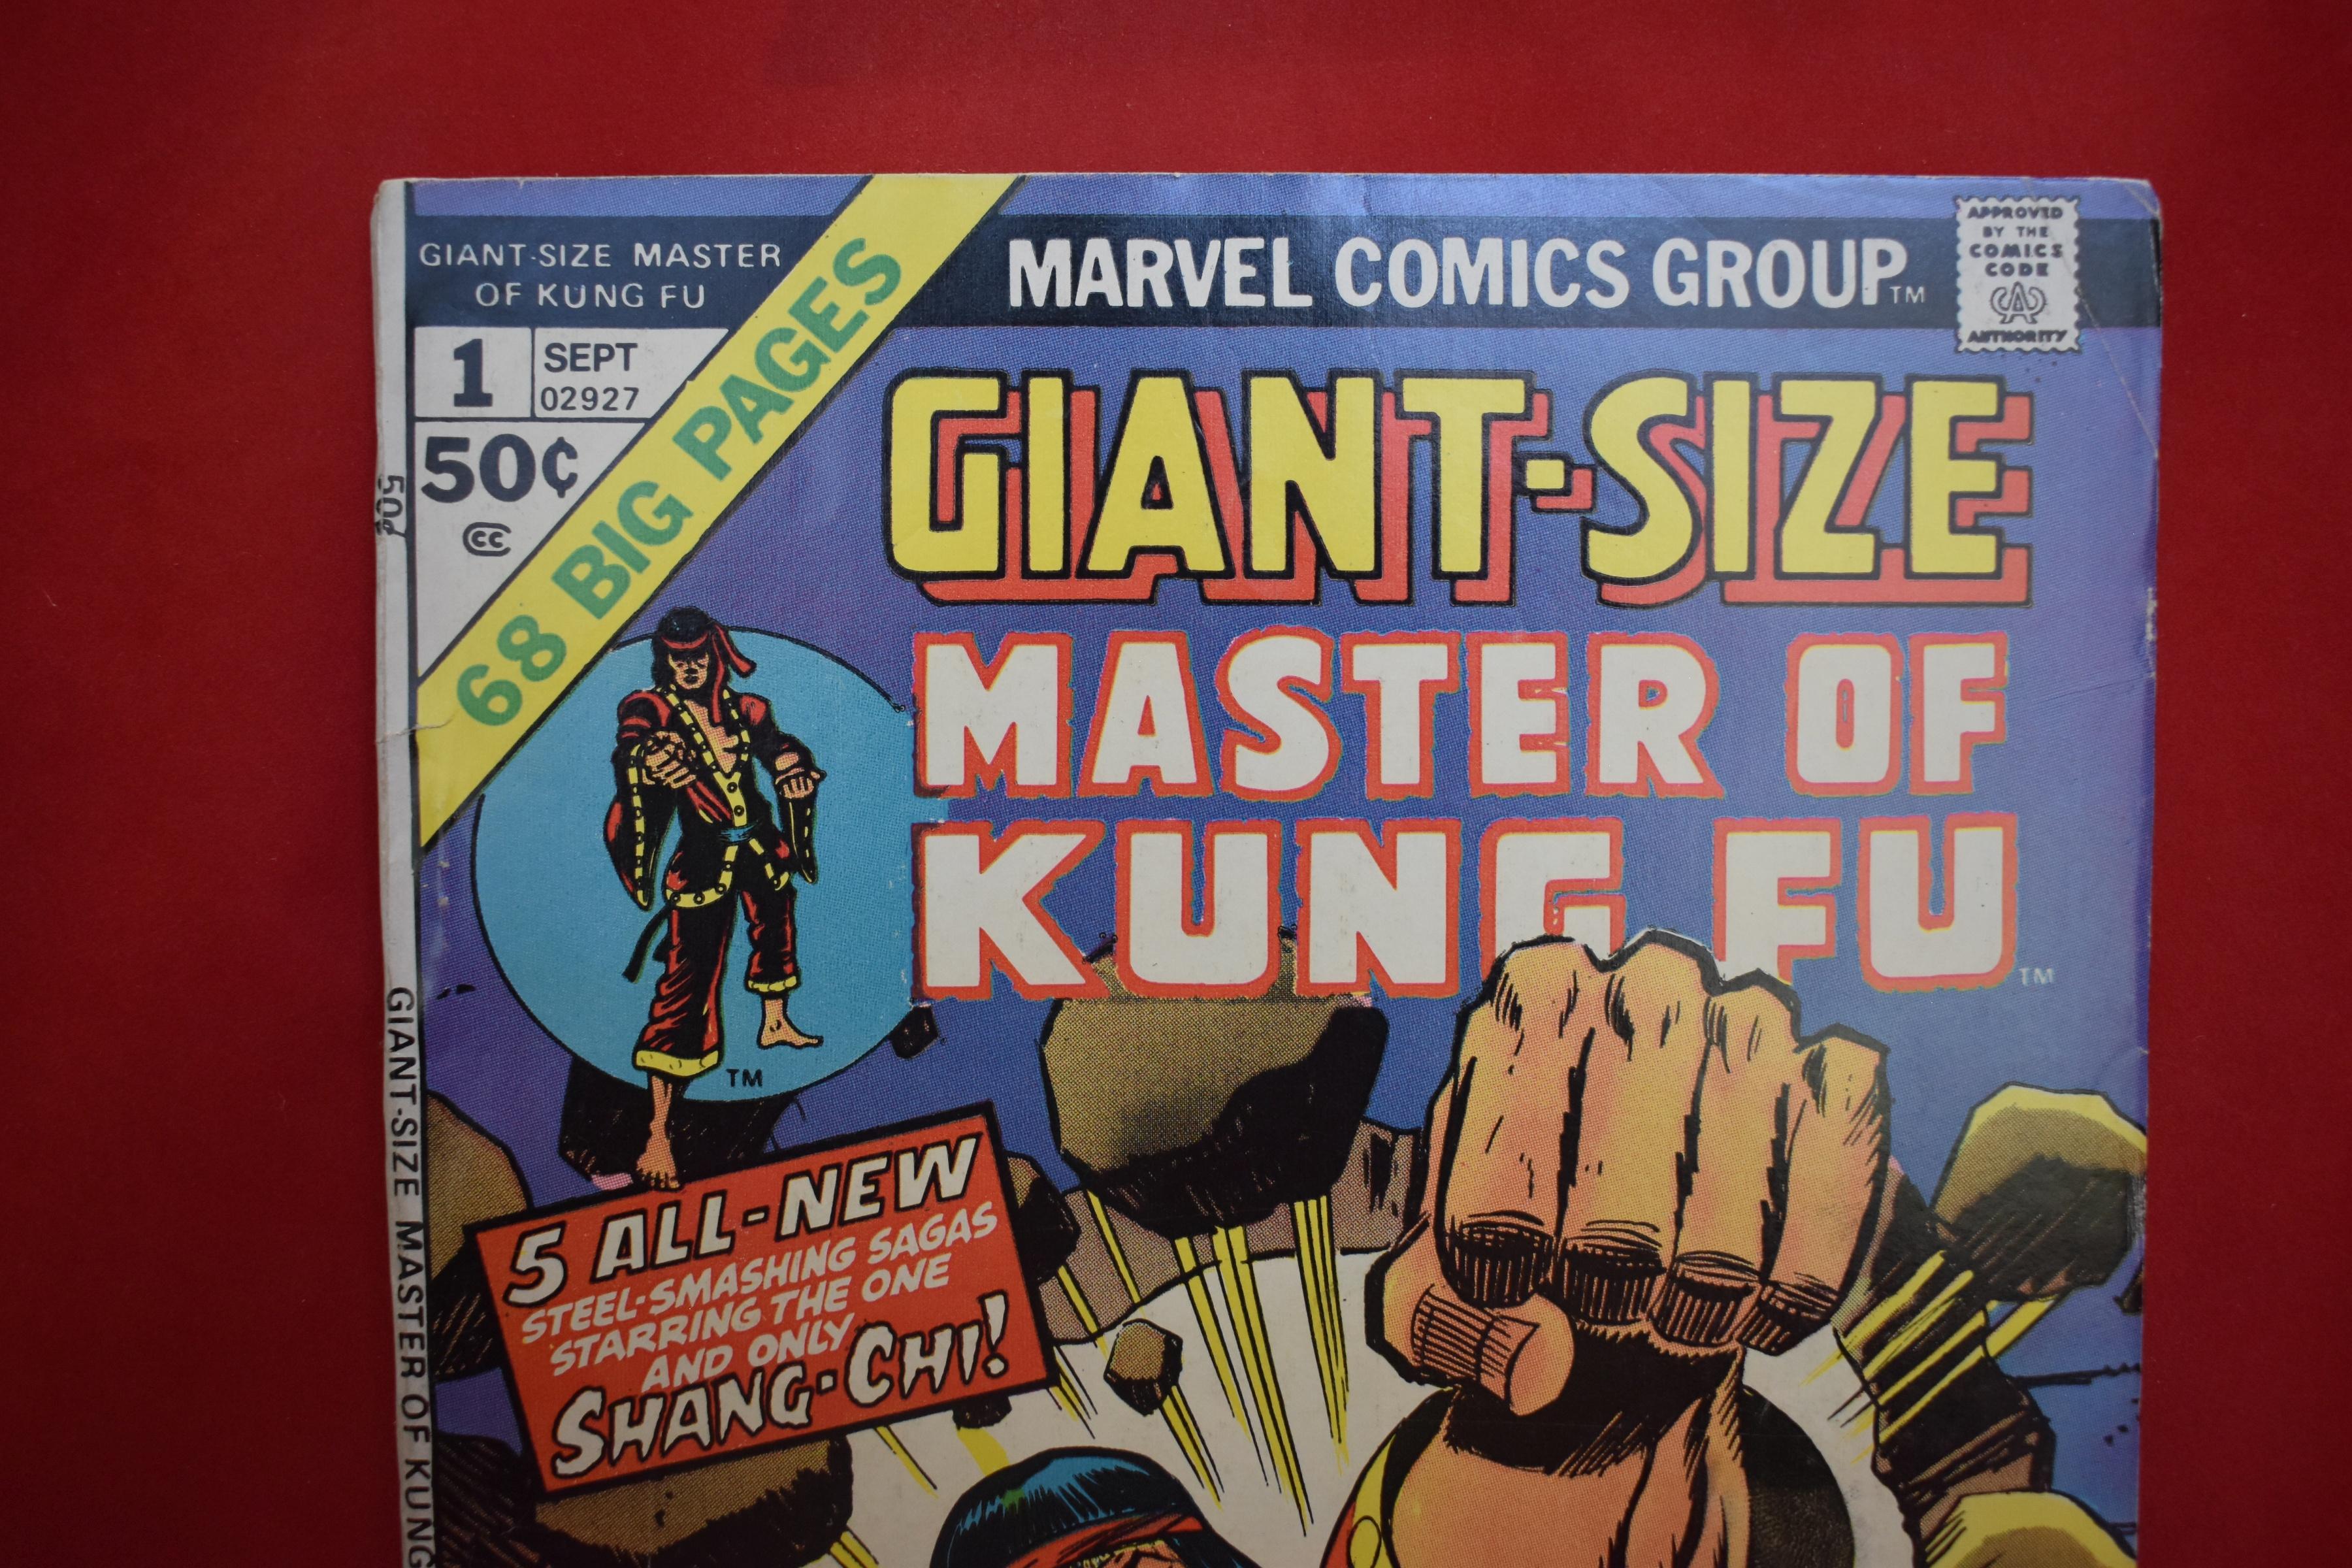 GIANT SIZE MASTER OF KUNG FU #1 | THE COMING OF THE YELLOW CLAW! | RON WILSON - 1974